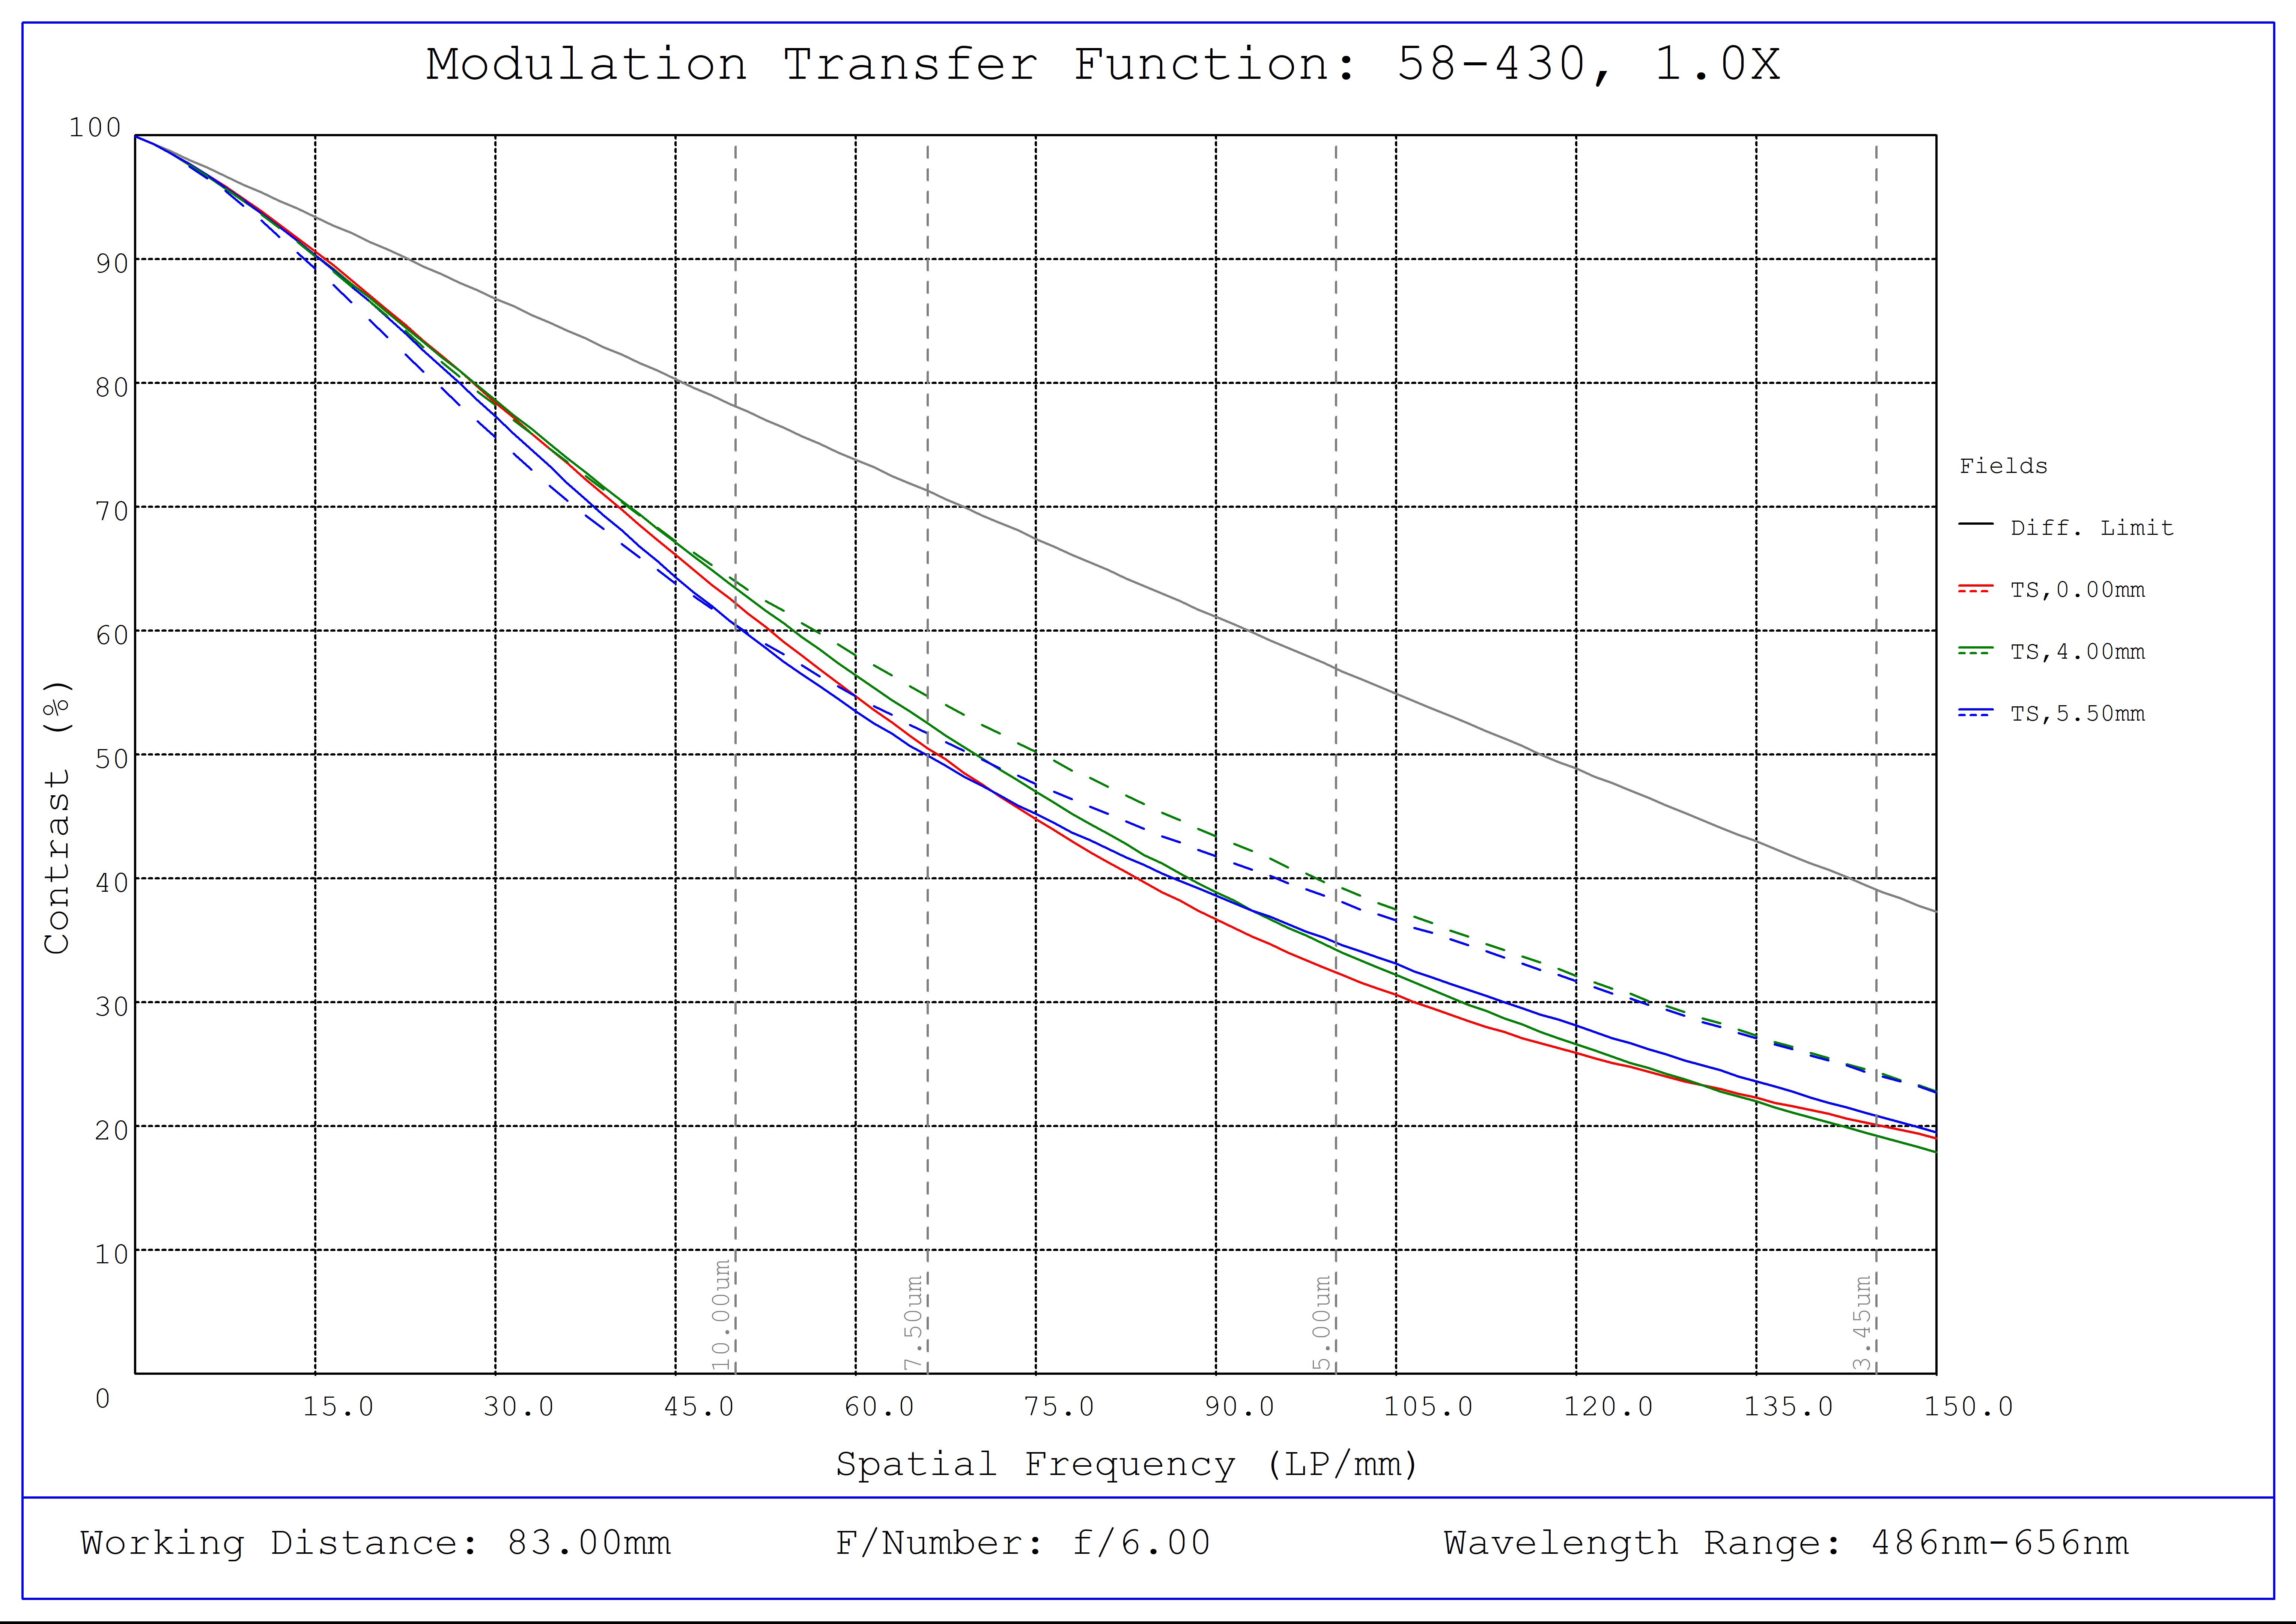 #58-430, 1.0X SilverTL™ Telecentric Lens, Modulated Transfer Function (MTF) Plot, 83mm Working Distance, f6